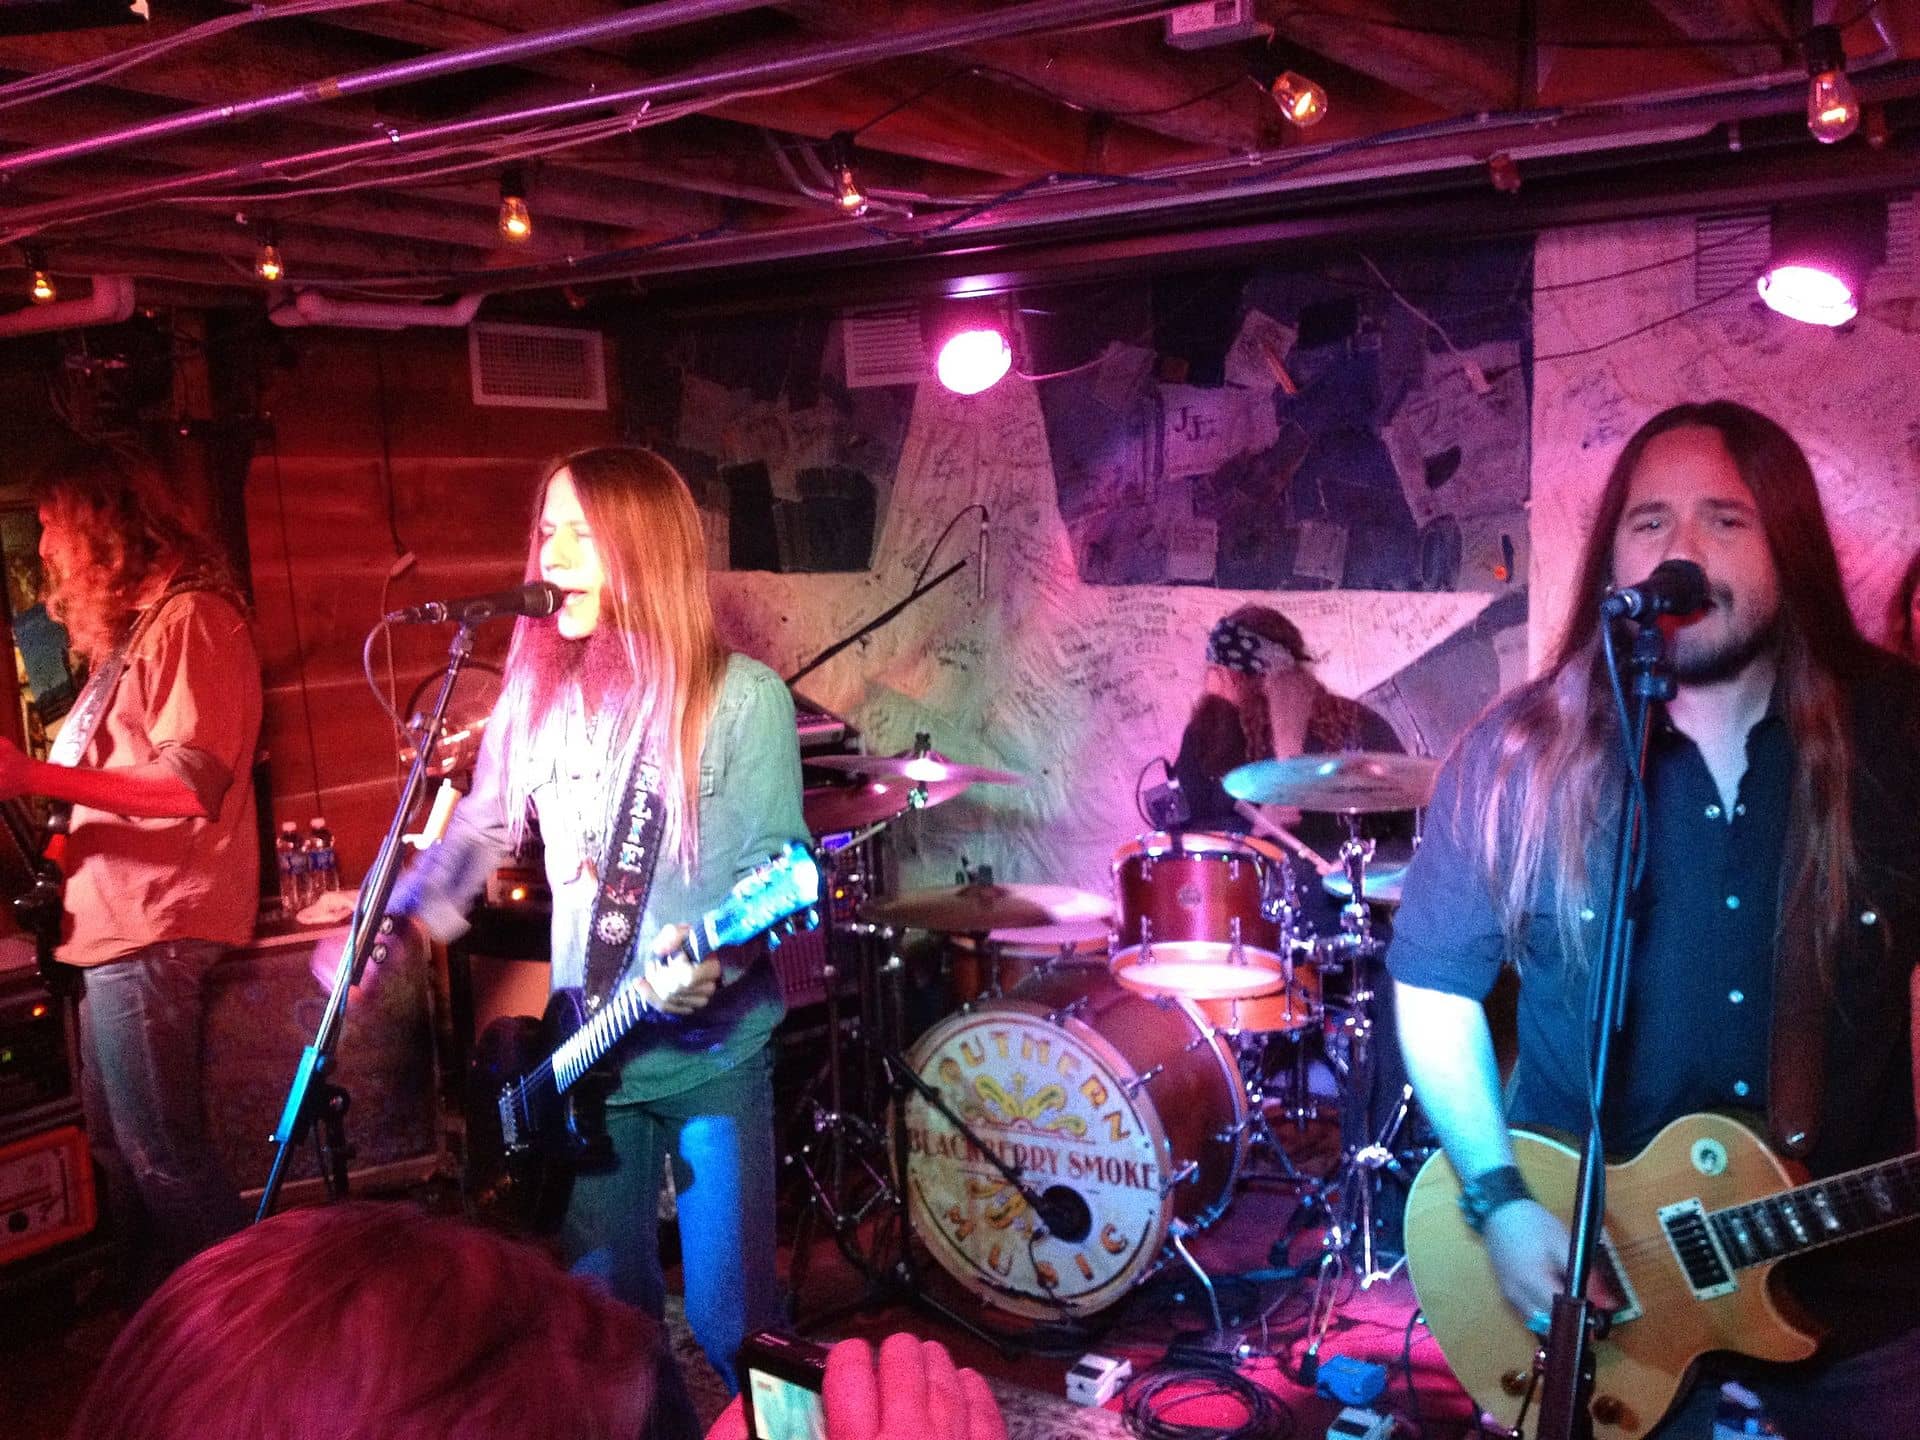 Blackberry Smoke in concert in 2012, Hill Country Barbecue, Washington DC Date 23 February 2012, 21:01:54 Credit: Source https://www.flickr.com/photos/staceyhuggins/7387007514/ Author: Stacey Huggins